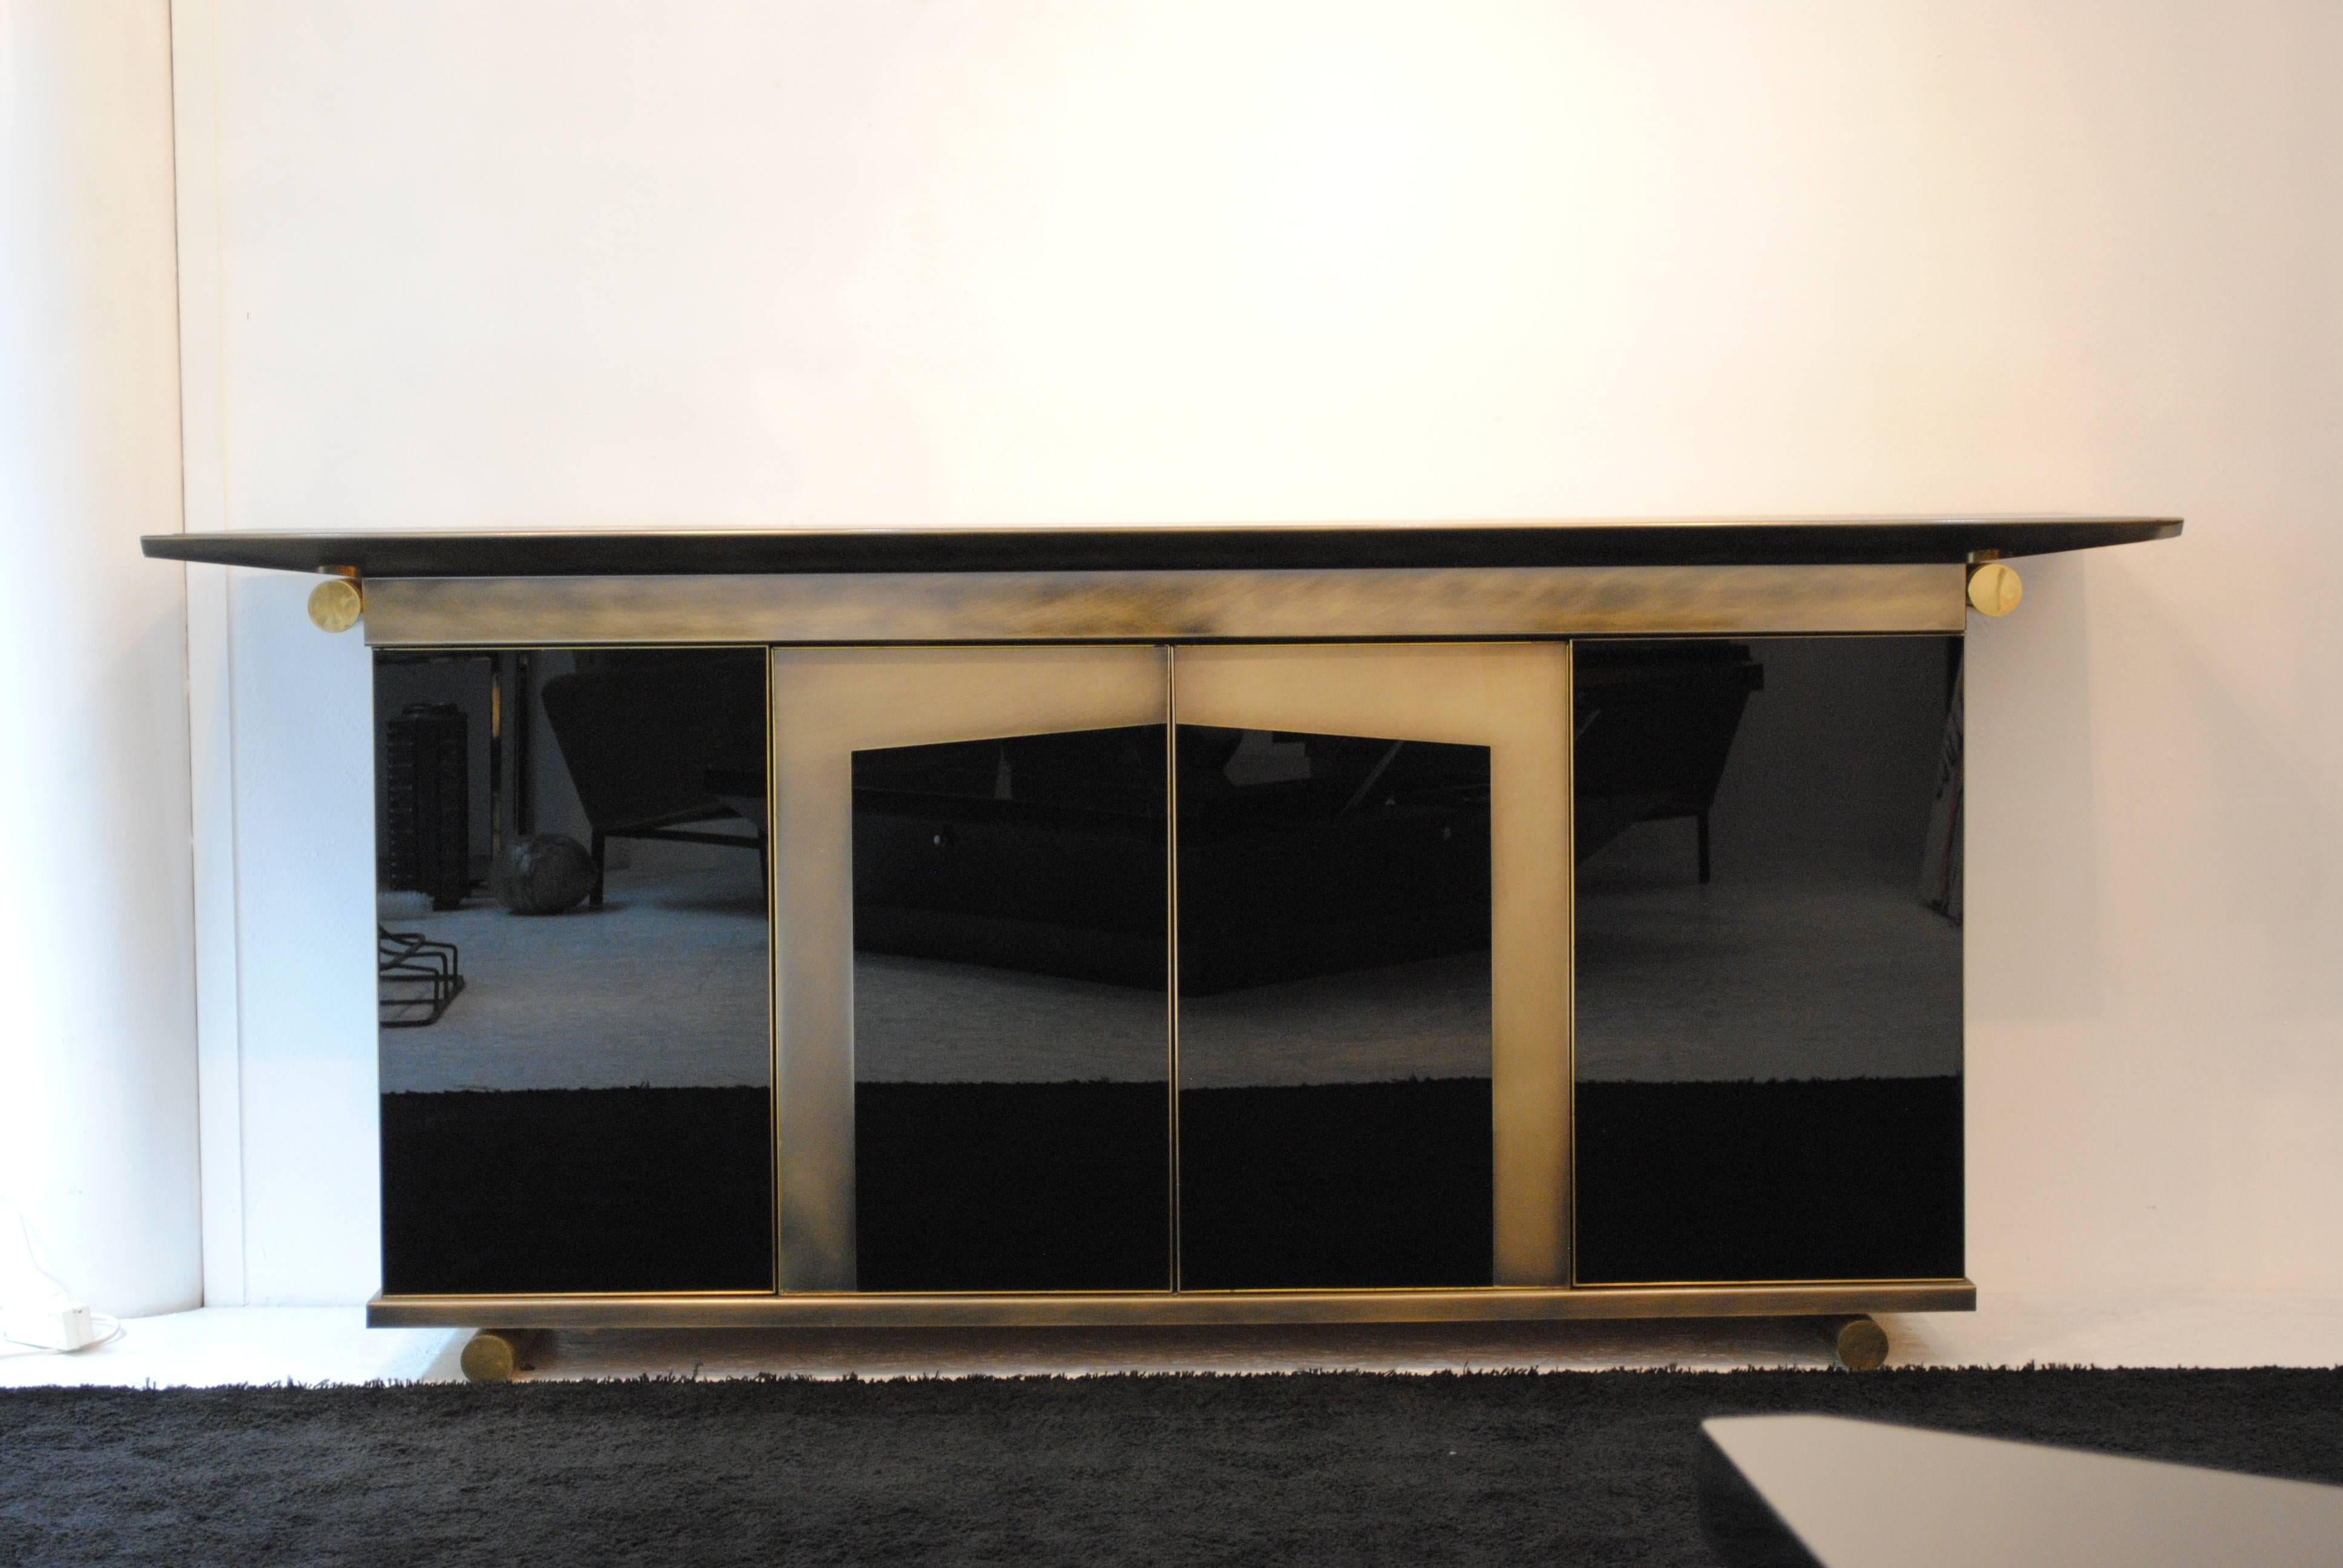 A never seen before spectacular high quality sideboard by Belgochrom, Belgium, 1970s.
This neoclassical piece combined hyalith glass, bronze patinated steel with gold-plated brass accents.

Very good vintage condition, a great match with Romeo